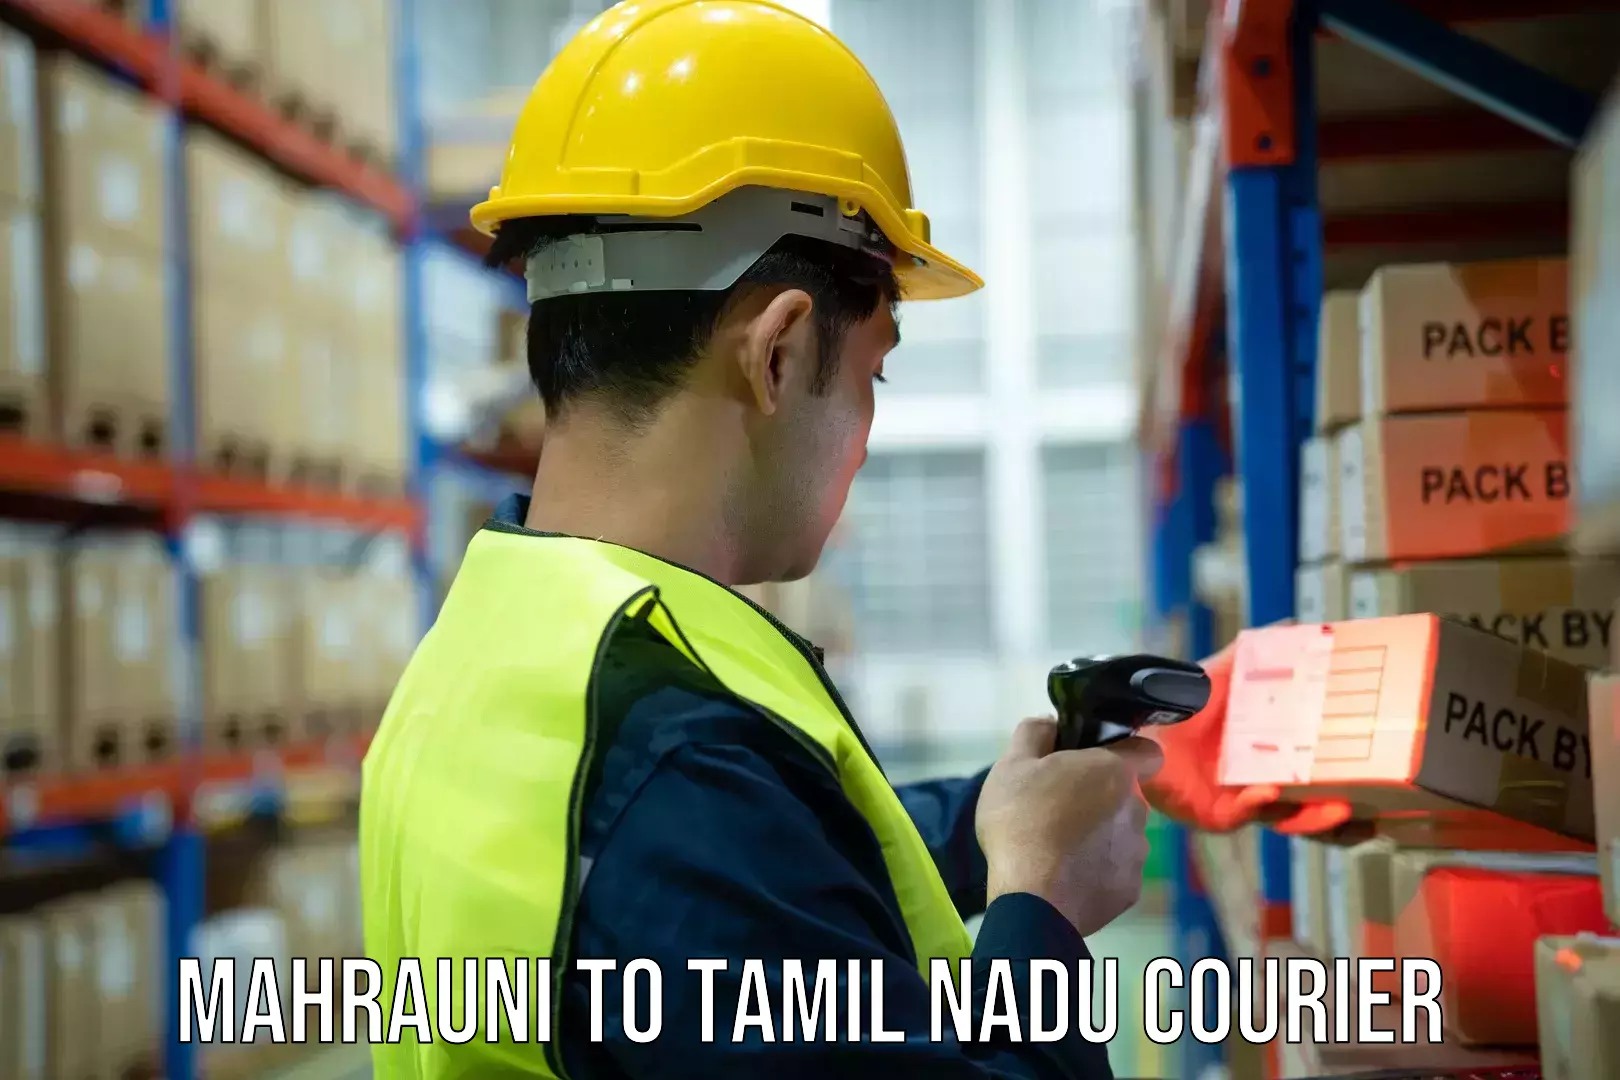 Nationwide delivery network Mahrauni to Chennai Port